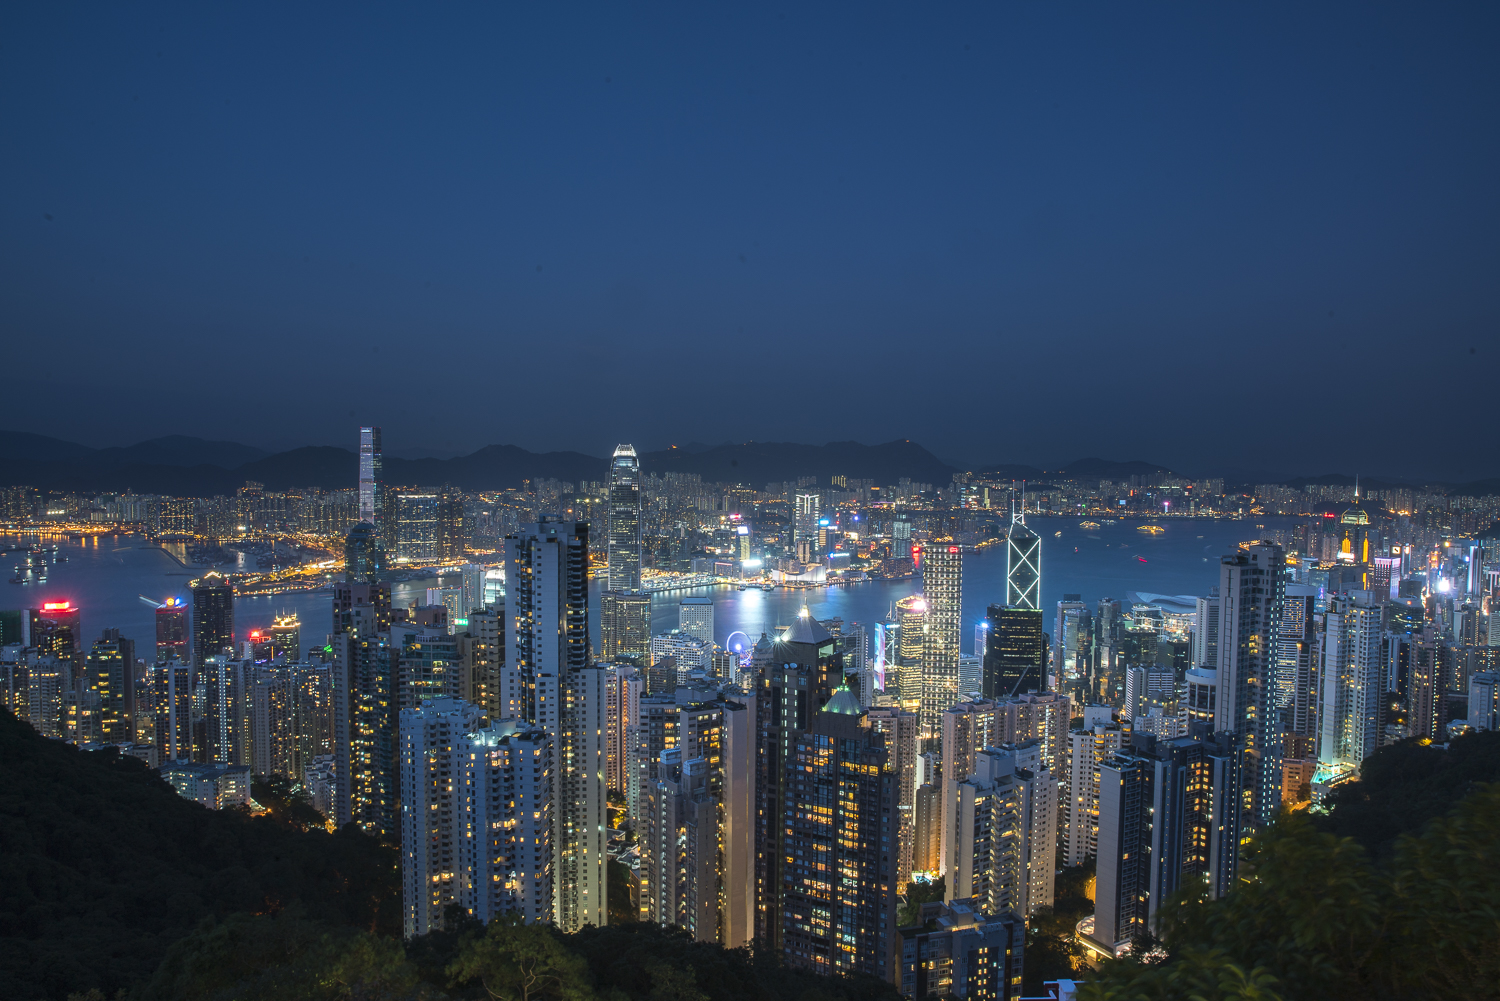 View from "The Peak" in Hong Kong at night © PhotoTravelNomads.com